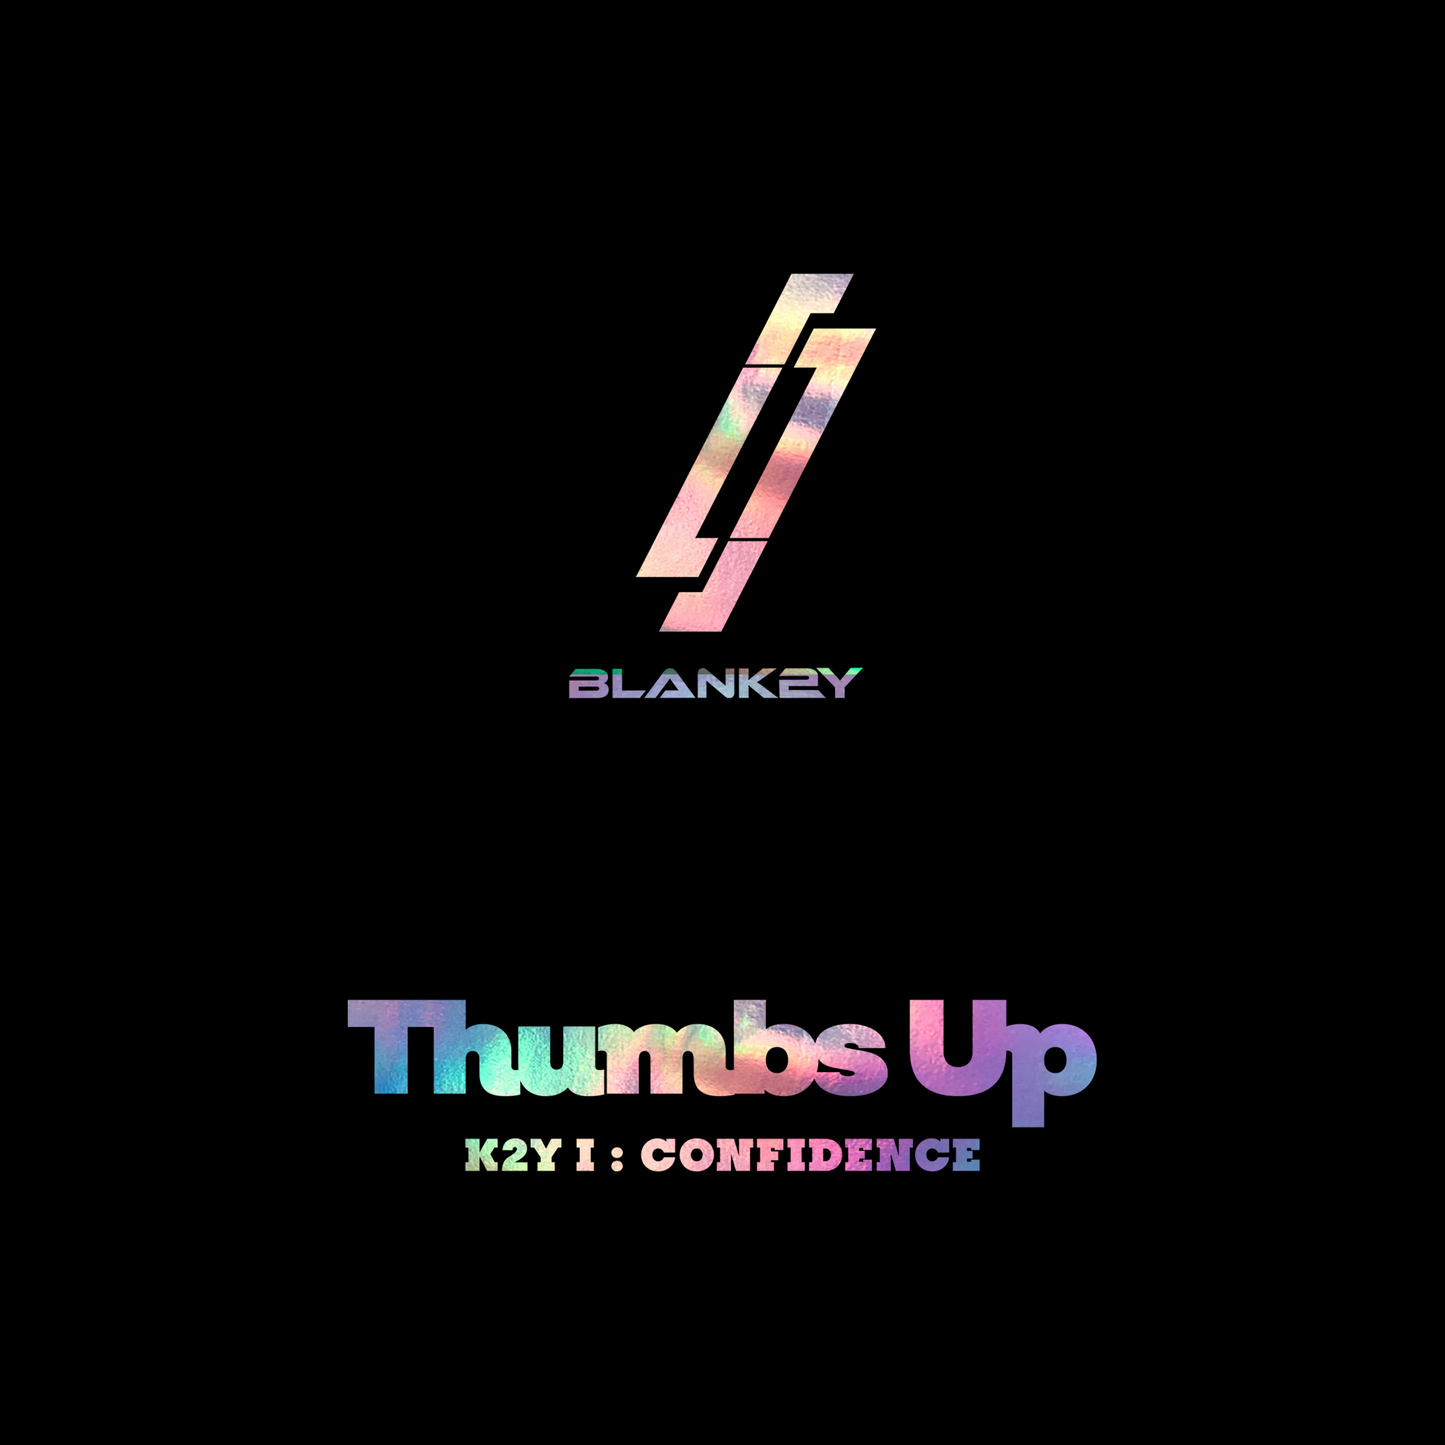 BLANK2Y - K2Y I: Confidence (Thumbs Up)